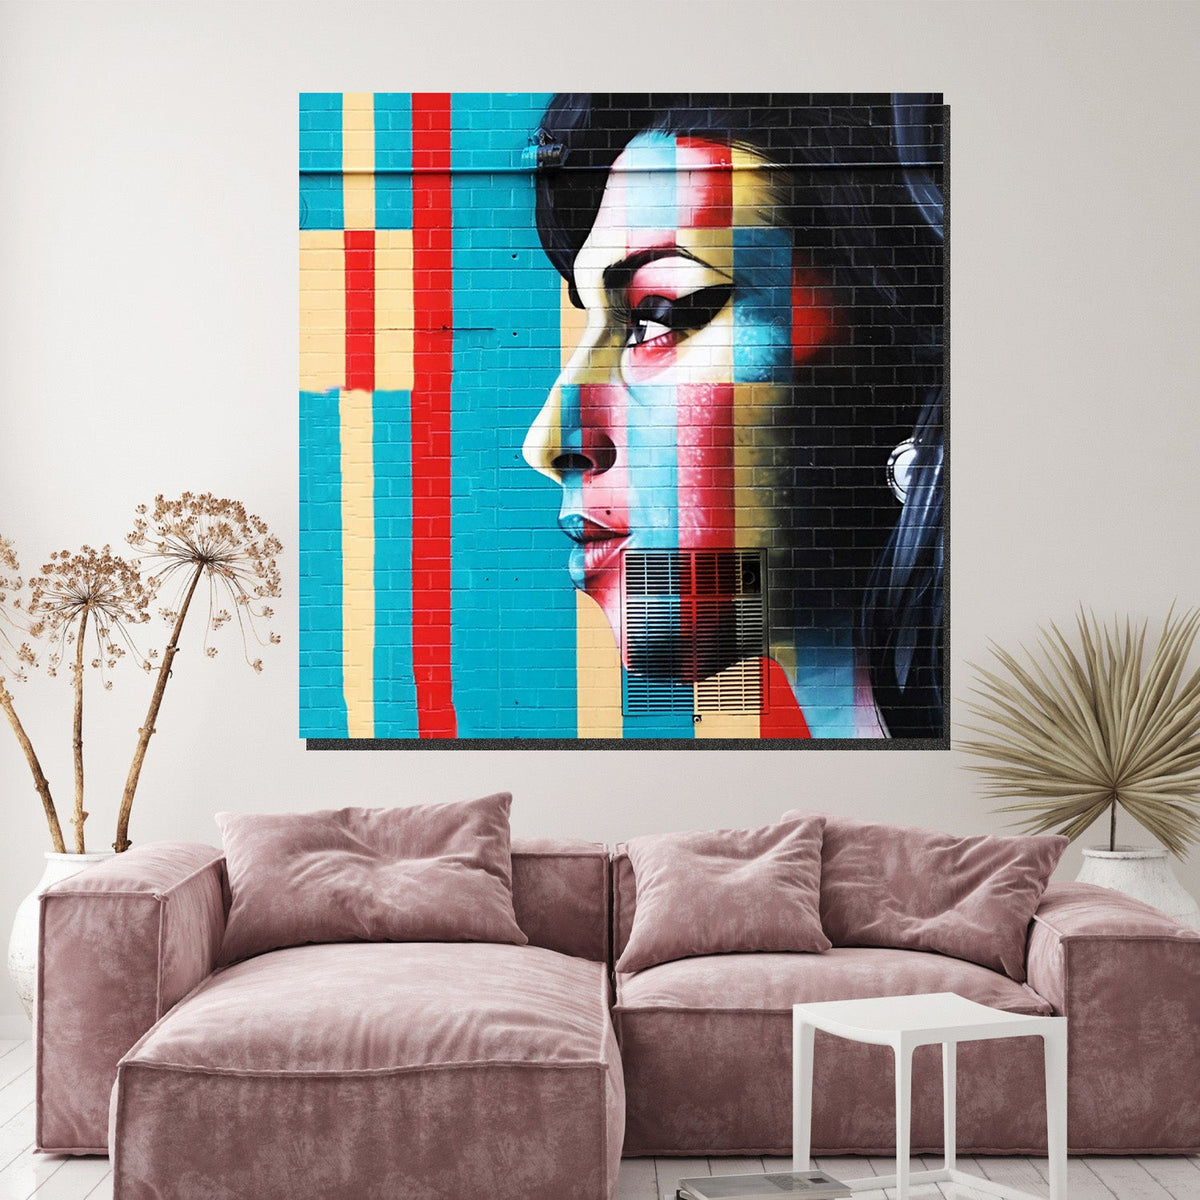 https://cdn.shopify.com/s/files/1/0387/9986/8044/products/AmyWineHouseCanvasArtPrintStretched-4.jpg